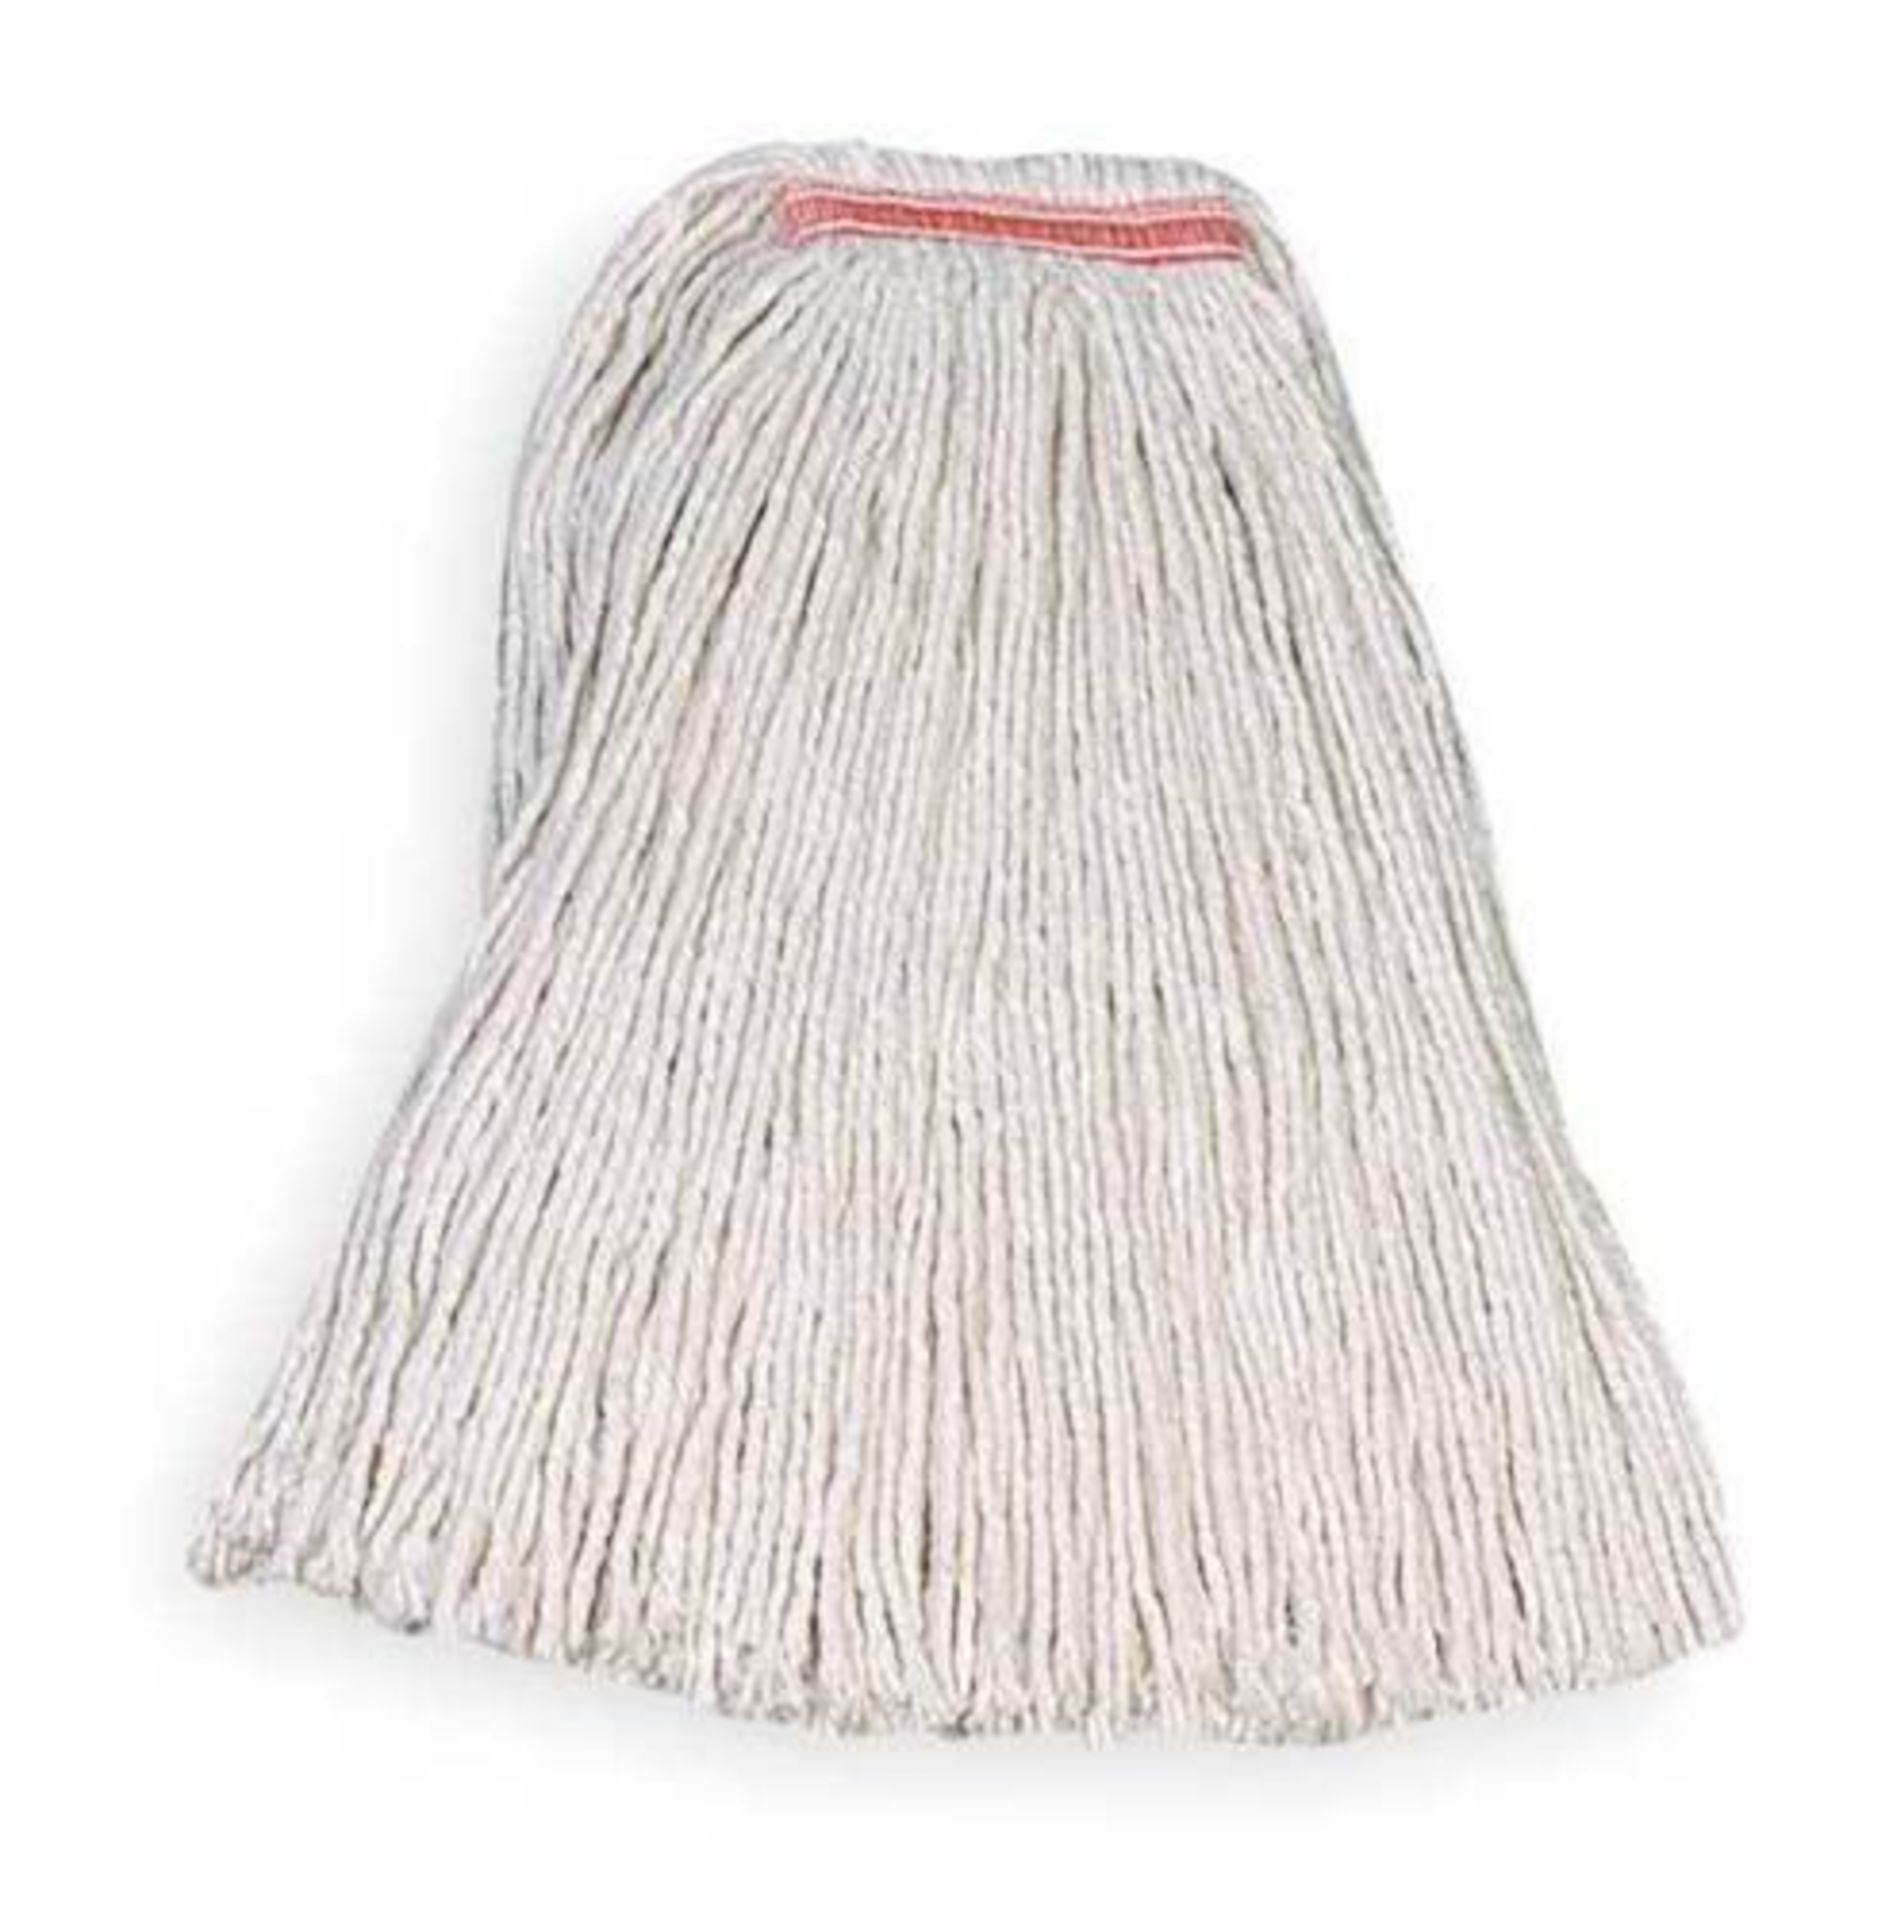 10X RUBBERMAID PROFESSIONAL SERIES MOP HEADS NEW